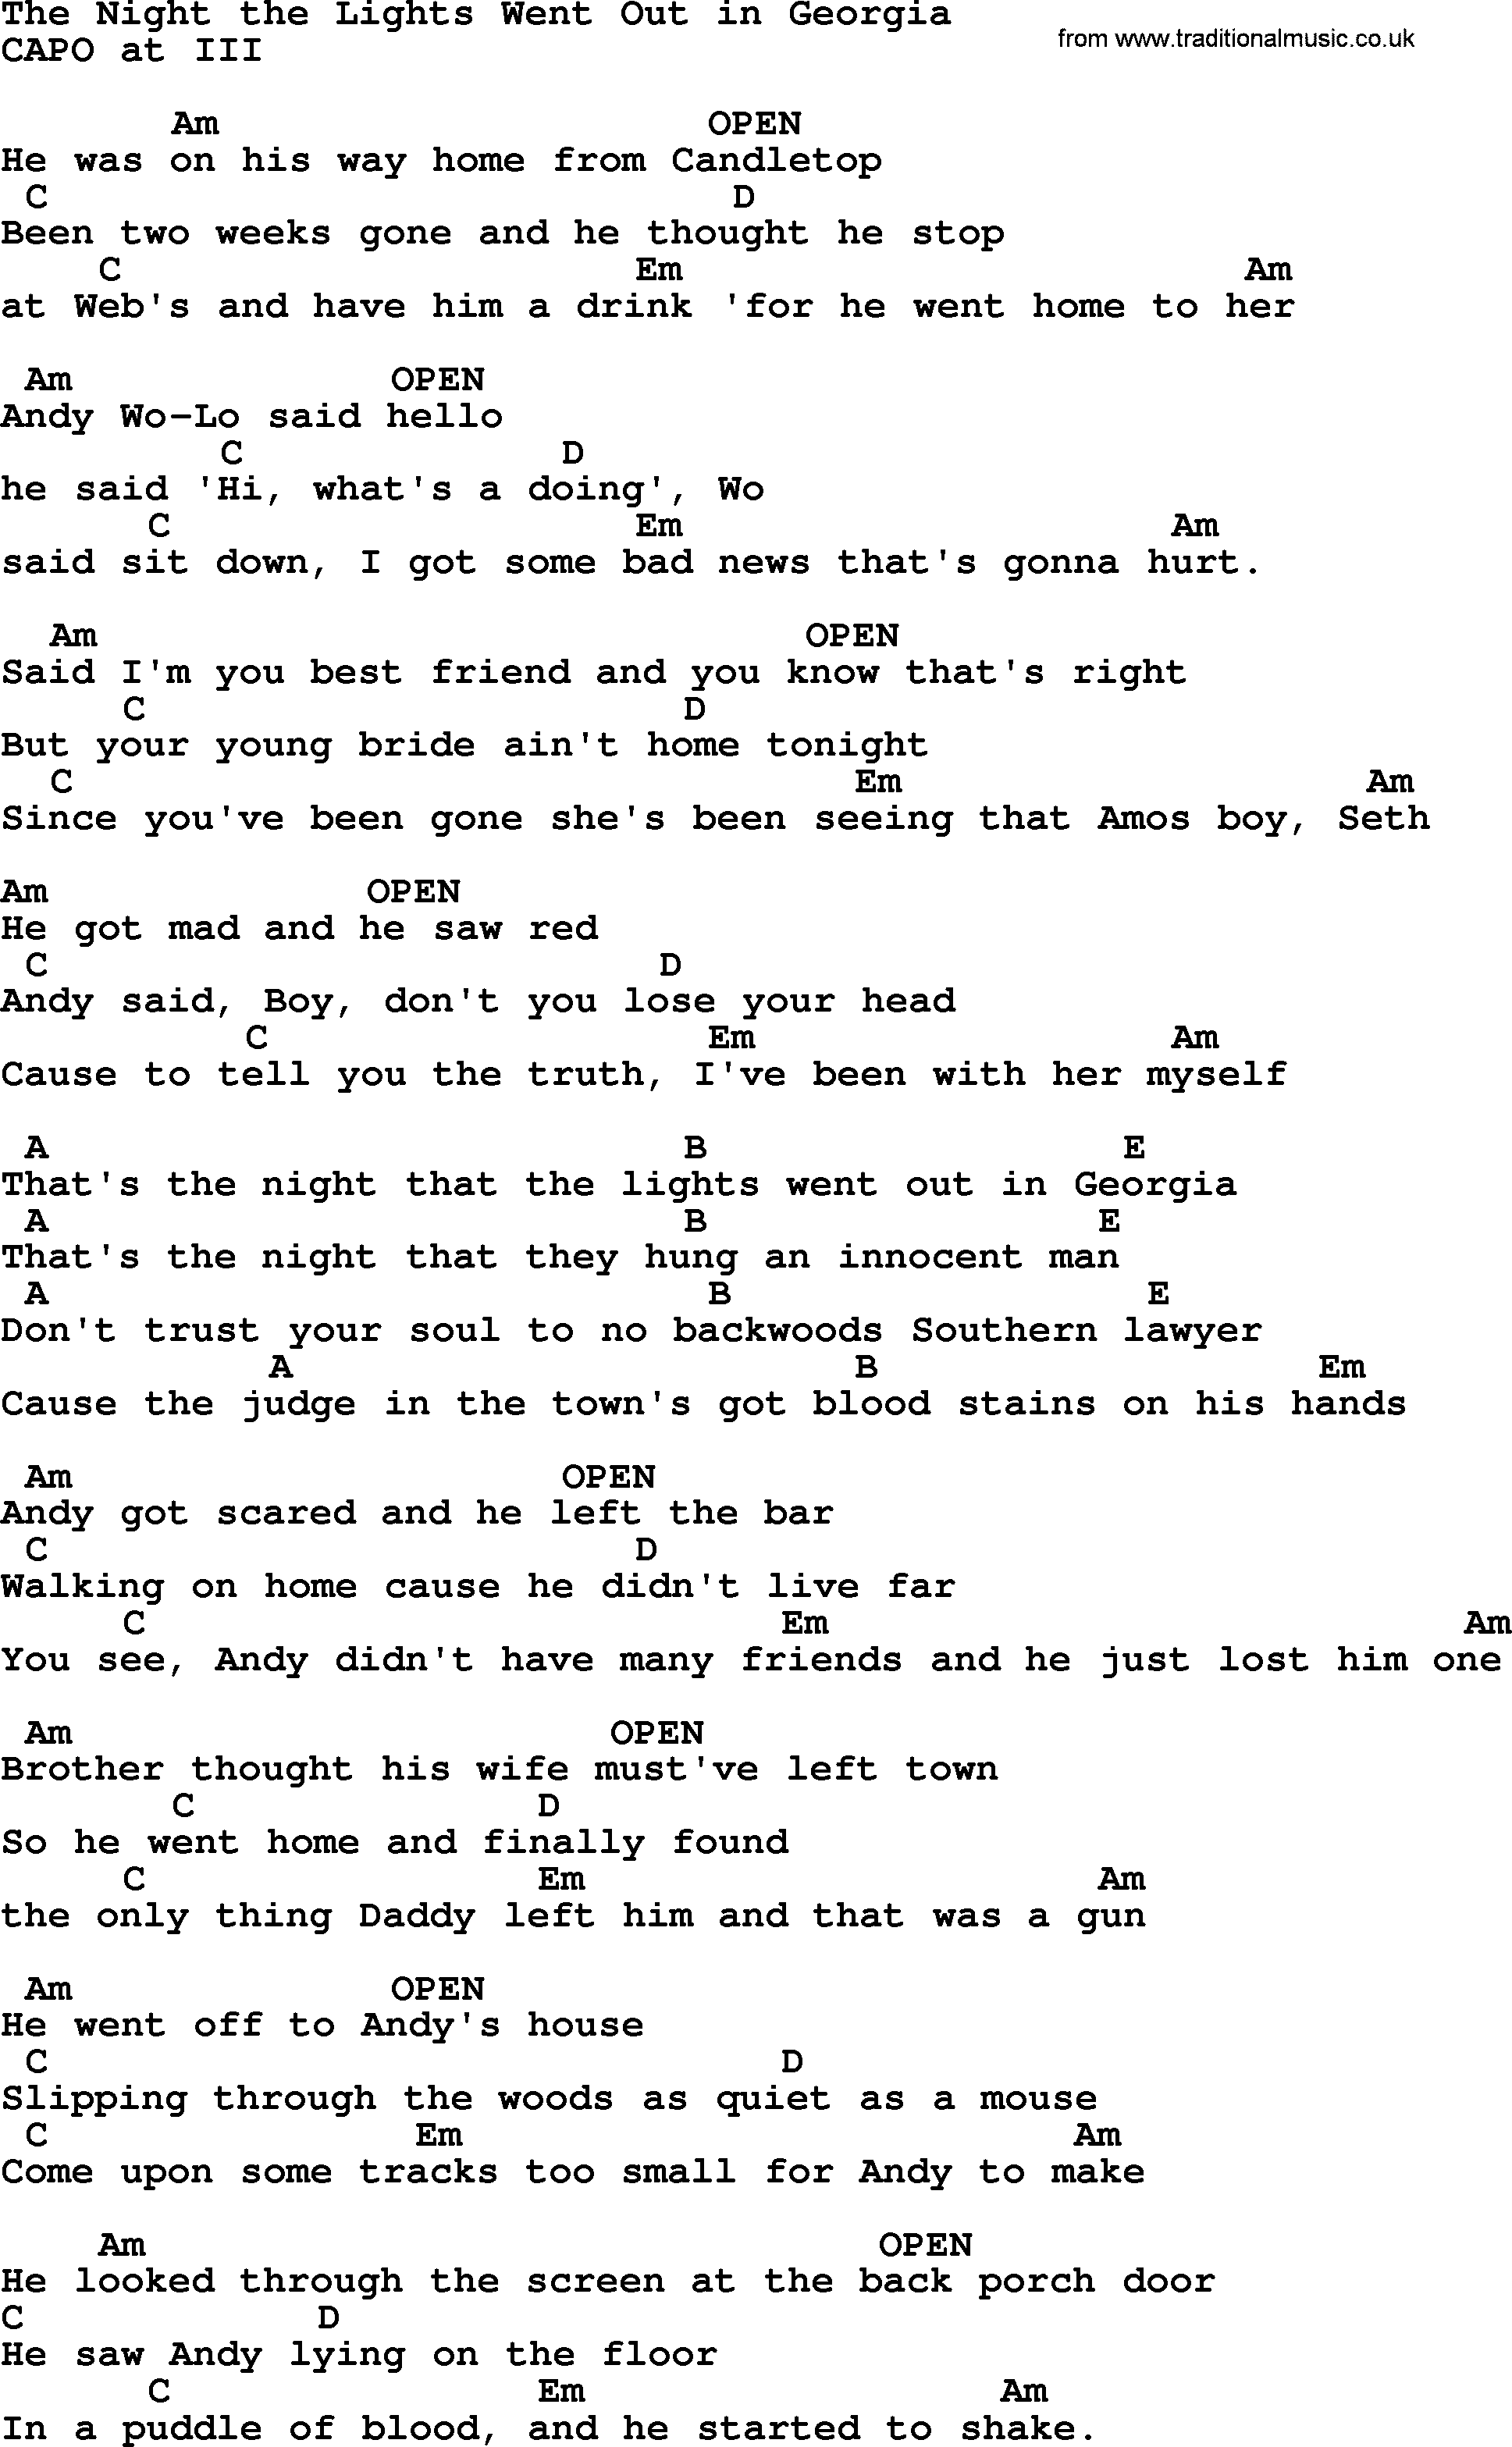 Reba McEntire song: The Night the Lights Went Out in Georgia, lyrics and chords